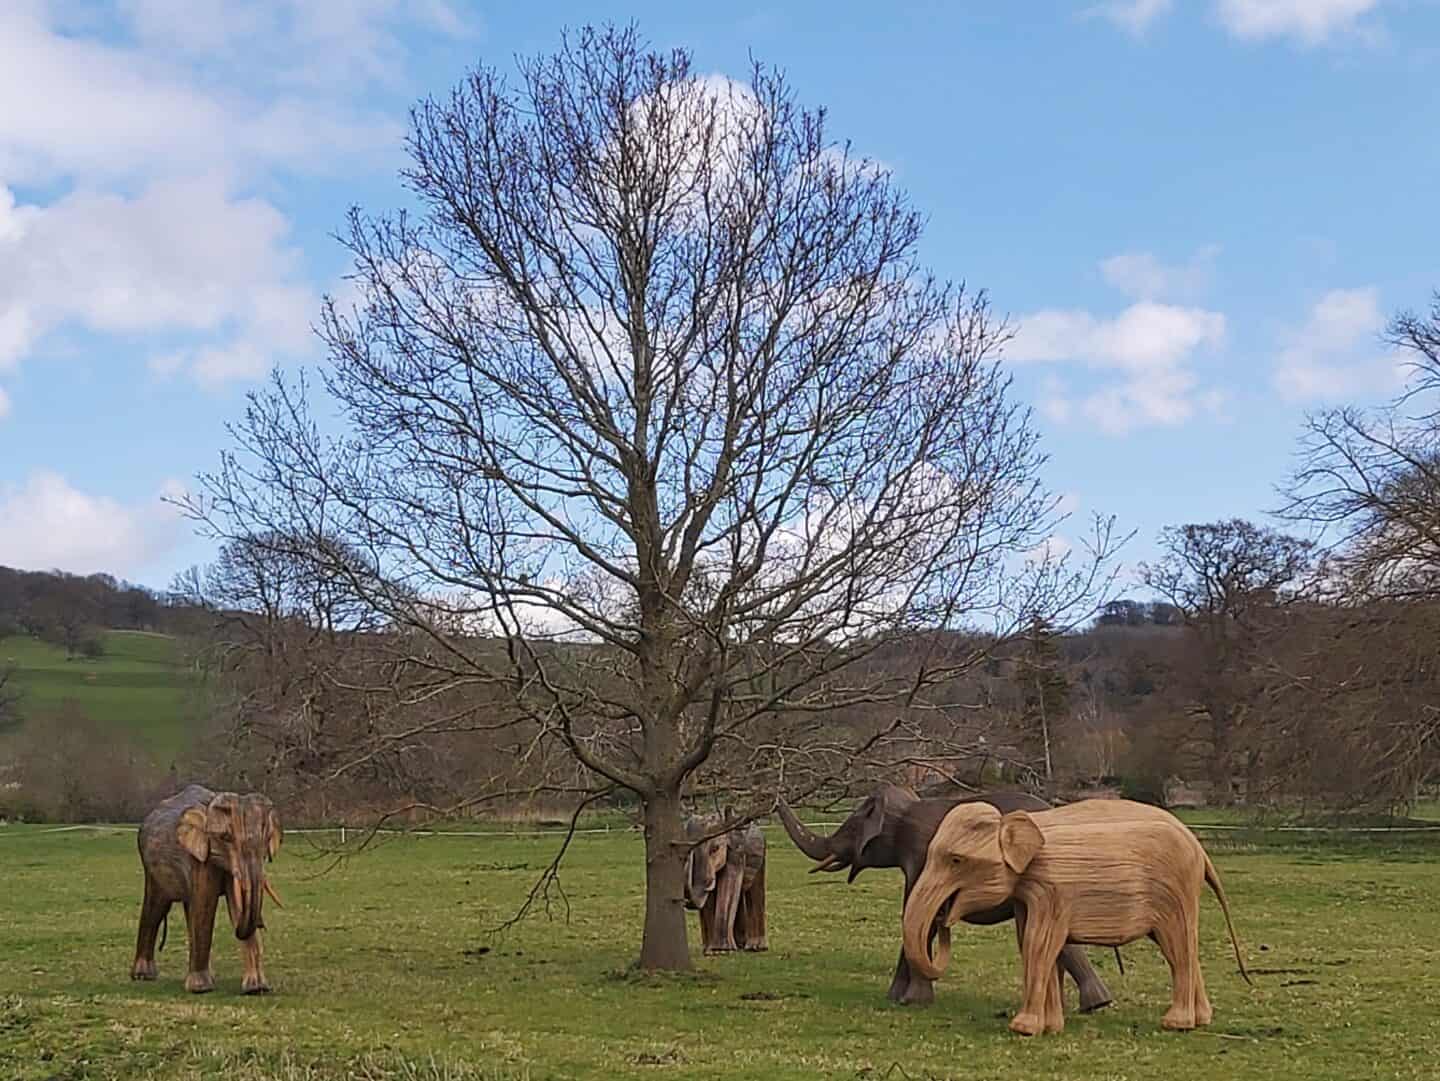 Elephants in the cotswold countryside